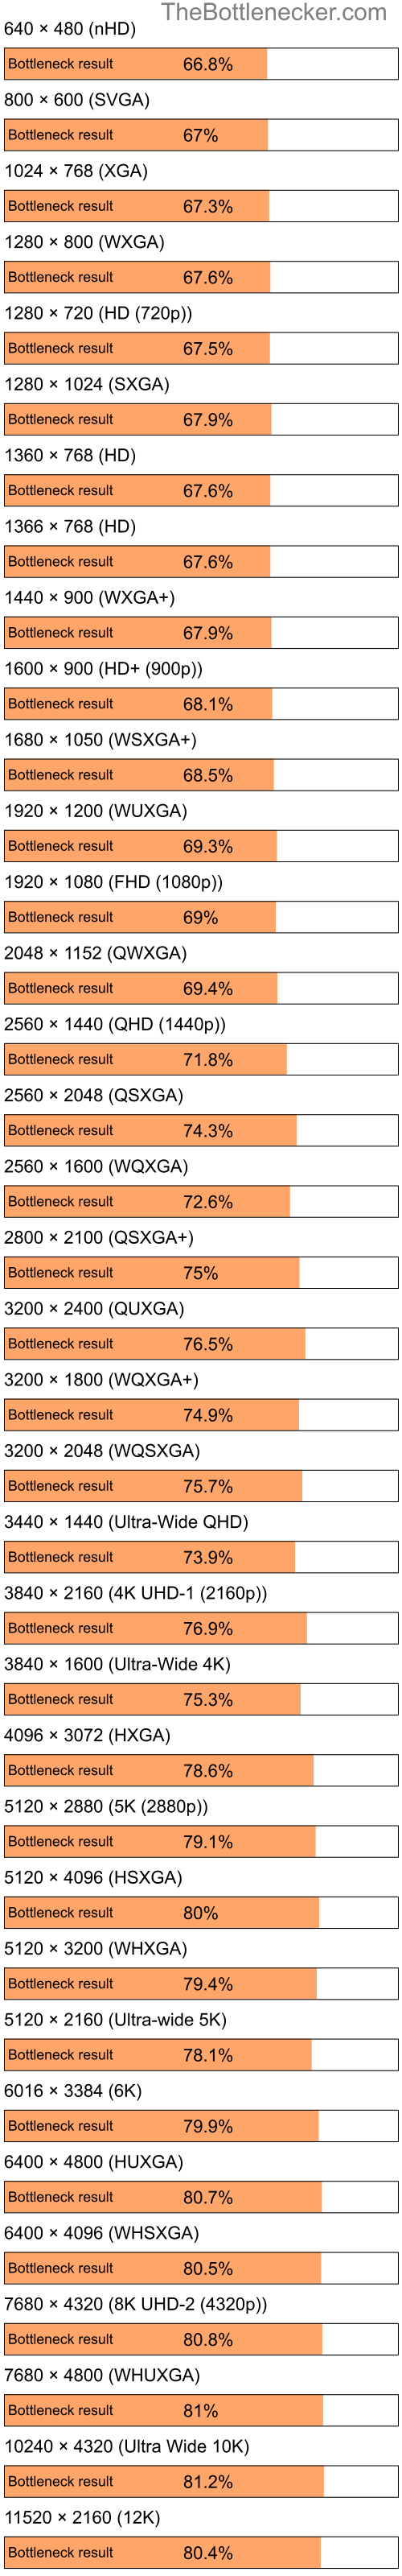 Bottleneck results by resolution for Intel Pentium 4 and NVIDIA GeForce 8200M G in General Tasks